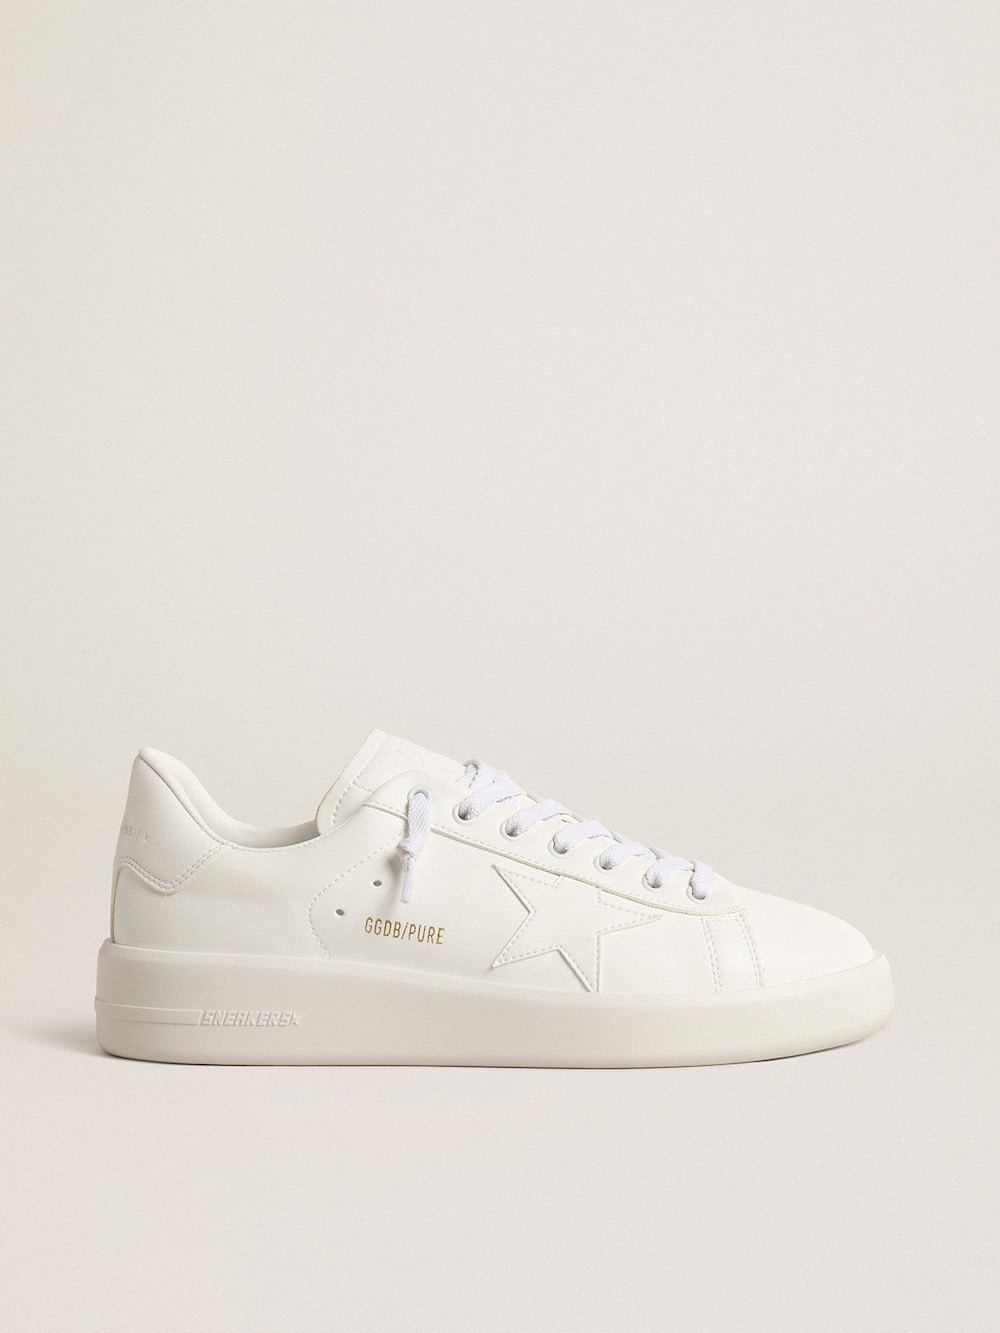 Golden Goose - Men’s bio-based Purestar with white star and heel tab in 